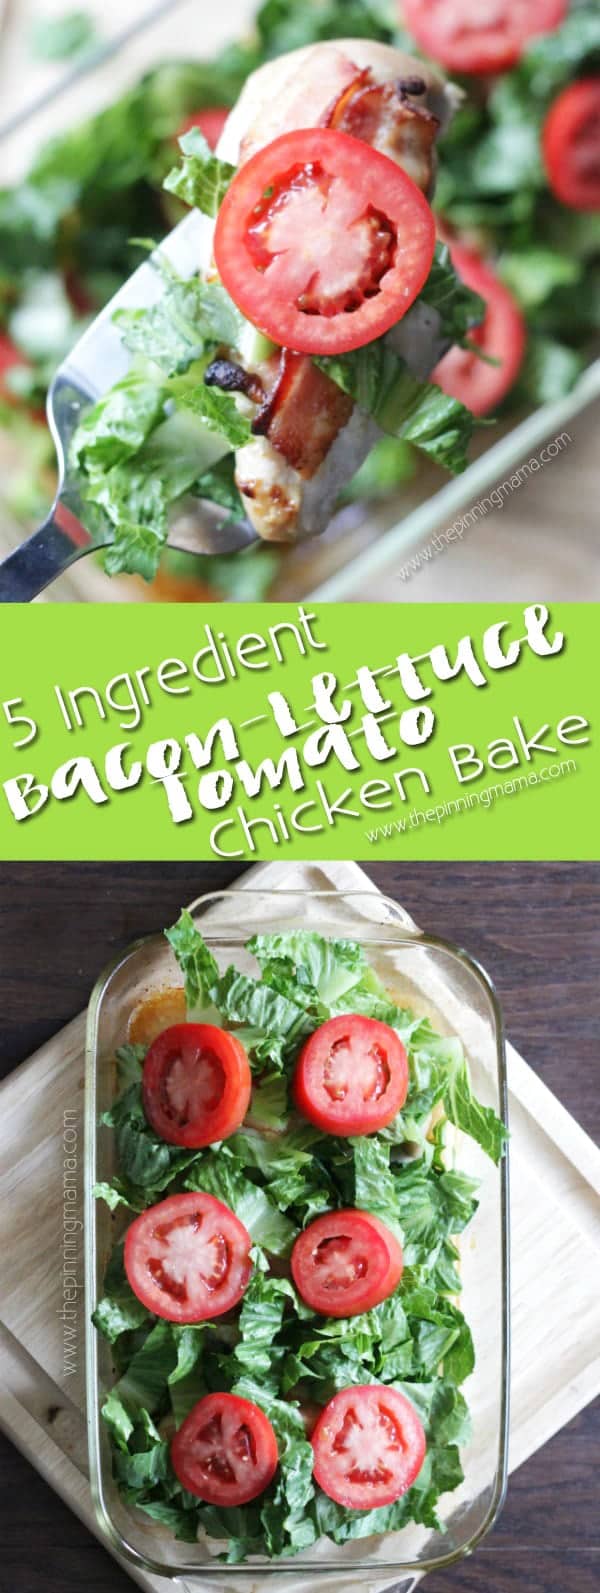 BLT Chicken Bake - Easy week night dinner recipe. Only 5 ingredients and minutes of prep to a hot, fresh and DELICIOUS chicken dinner baked in a casserole dish. A new twist on the classic bacon, lettuce, and tomato flavor combo!